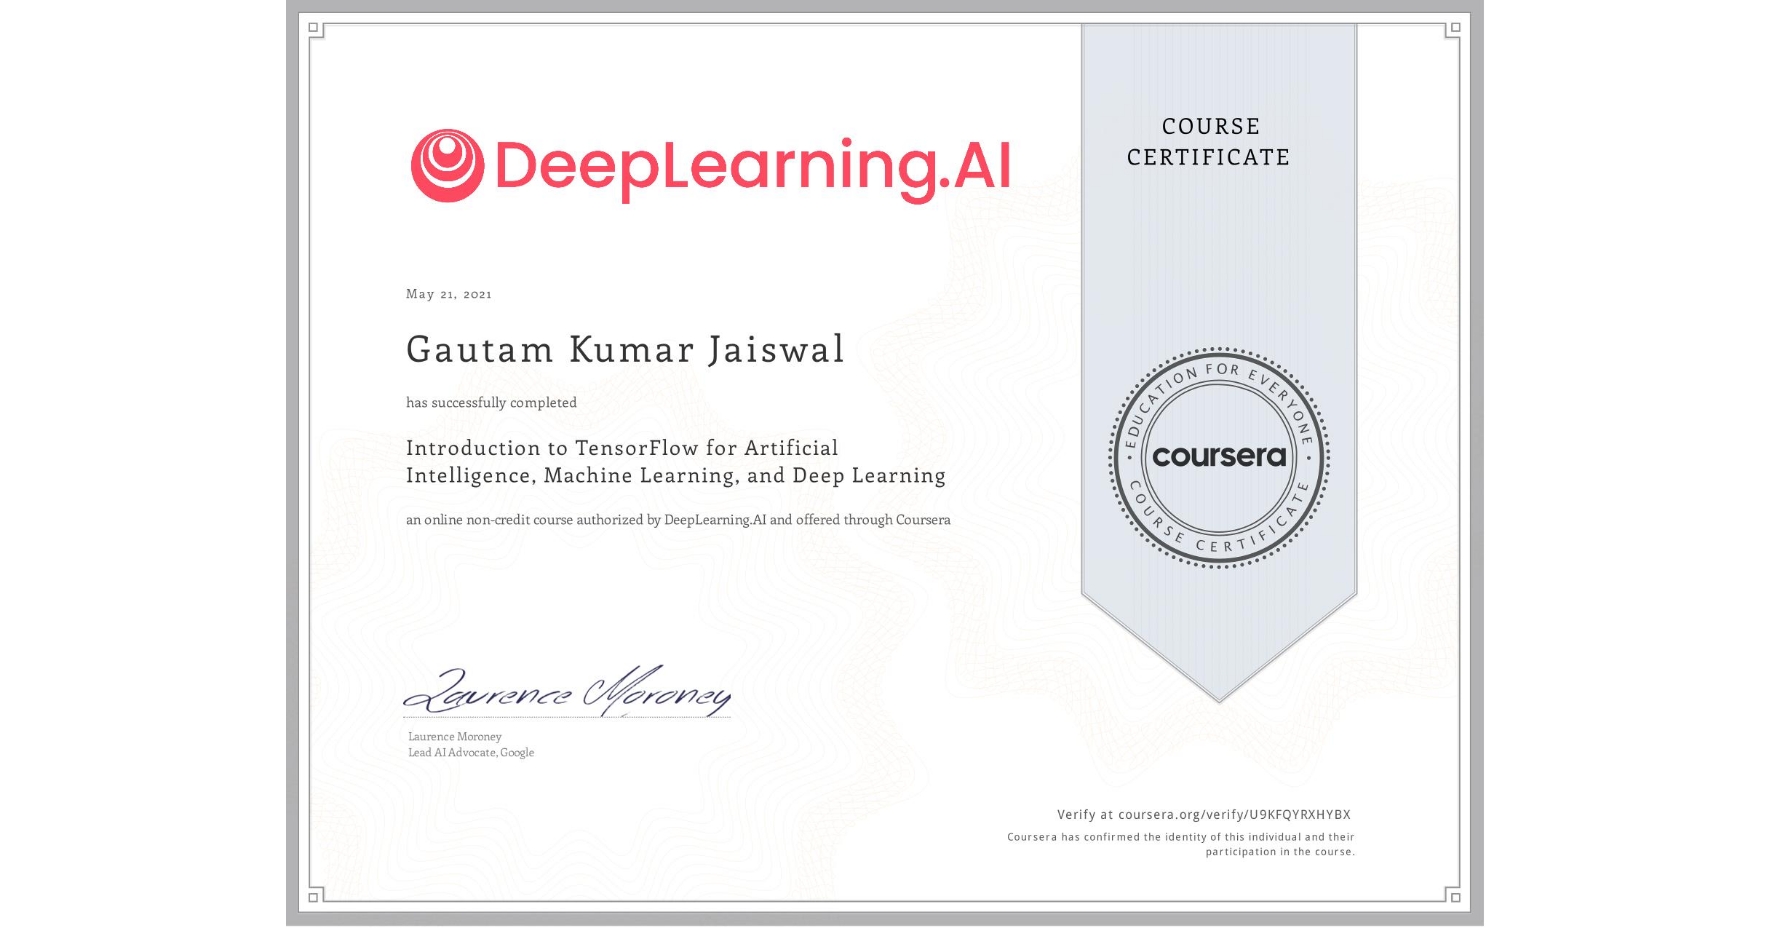 Gautam Kumar Jaiswal | Introduction to TensorFlow for Artificial Intelligence, Machine Learning, and Deep Learning